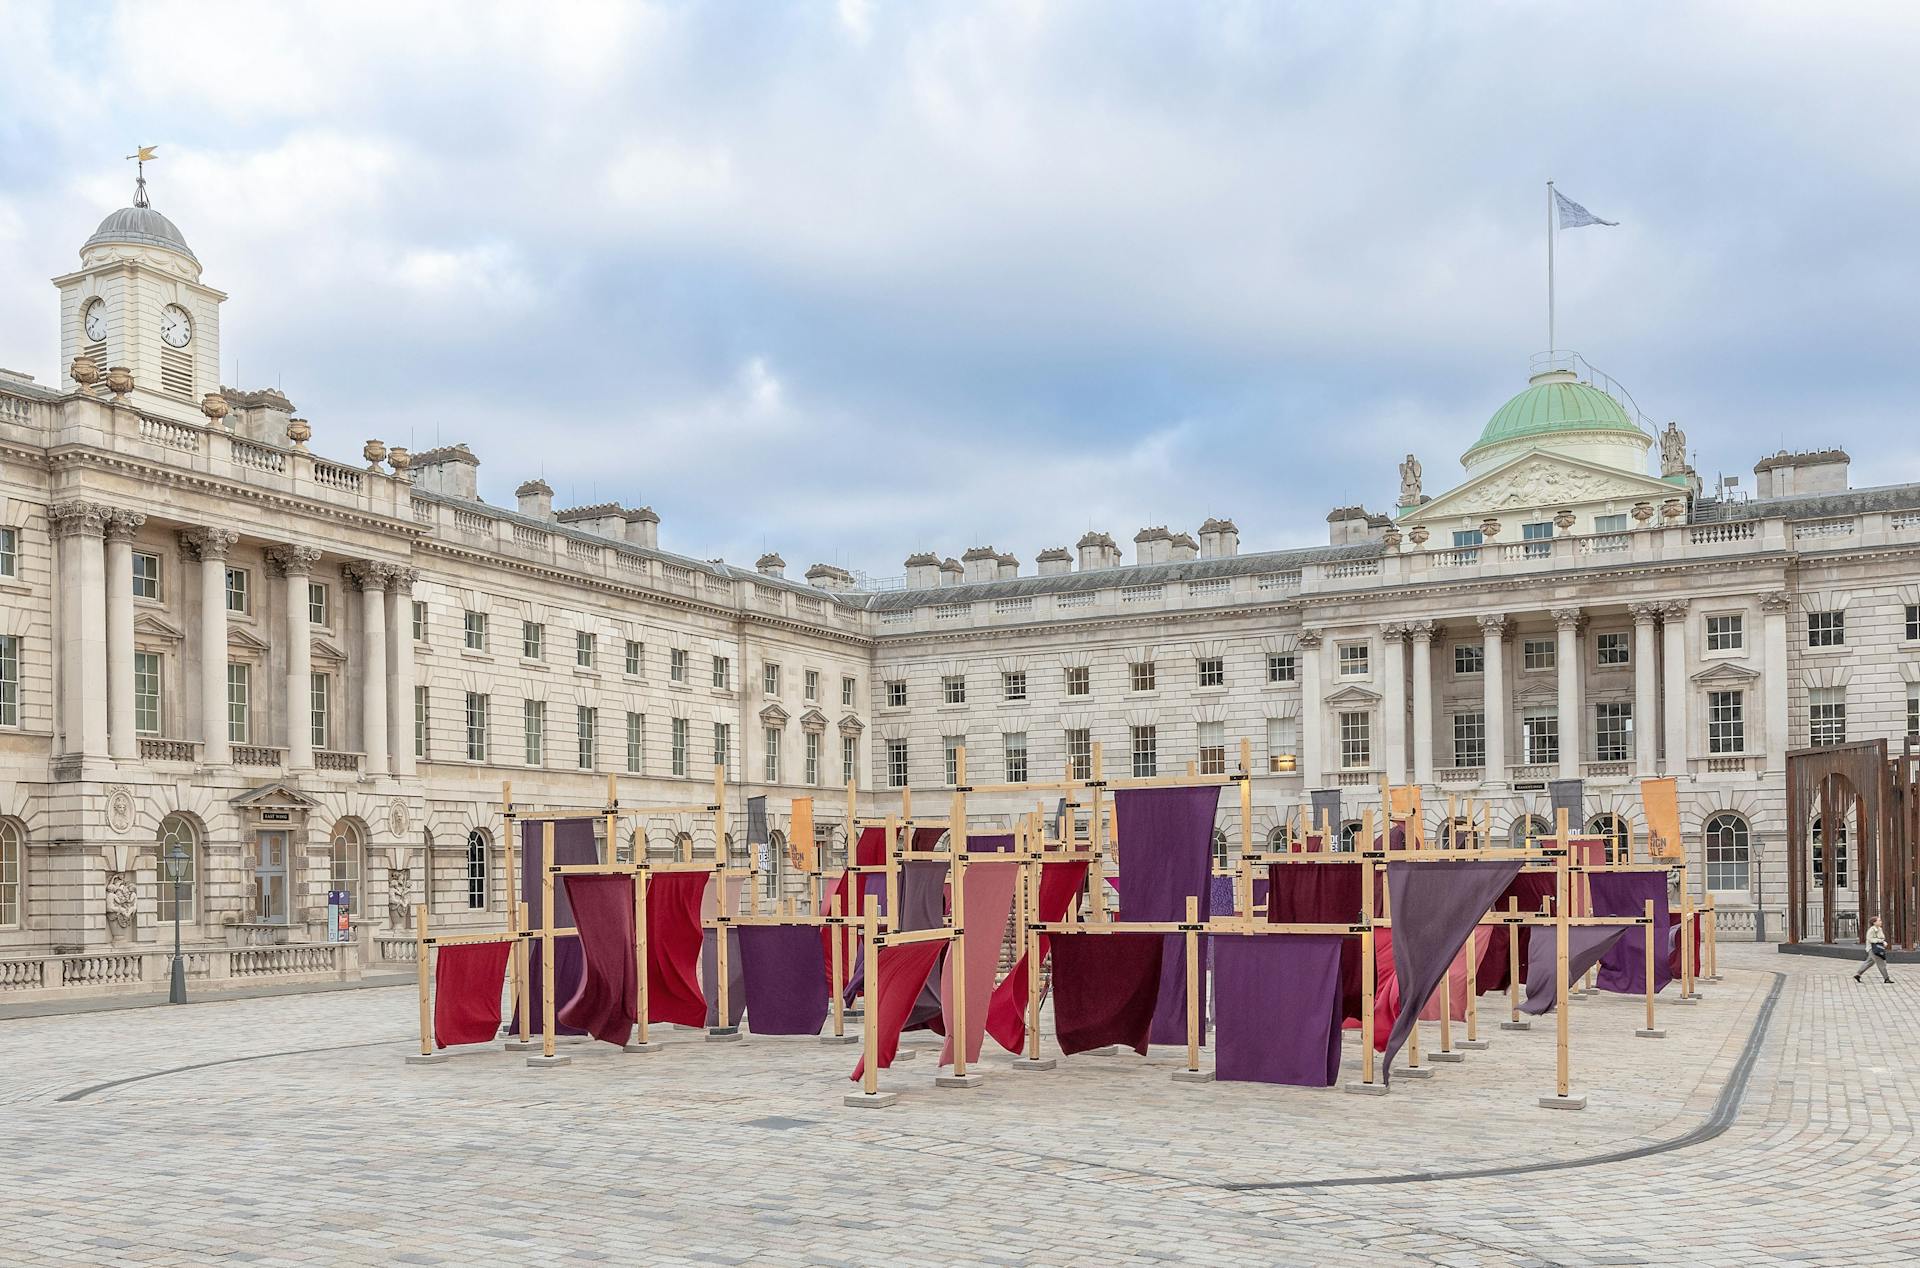 An image from the outside of Somerset House, where the London Design Biennale is taking place.